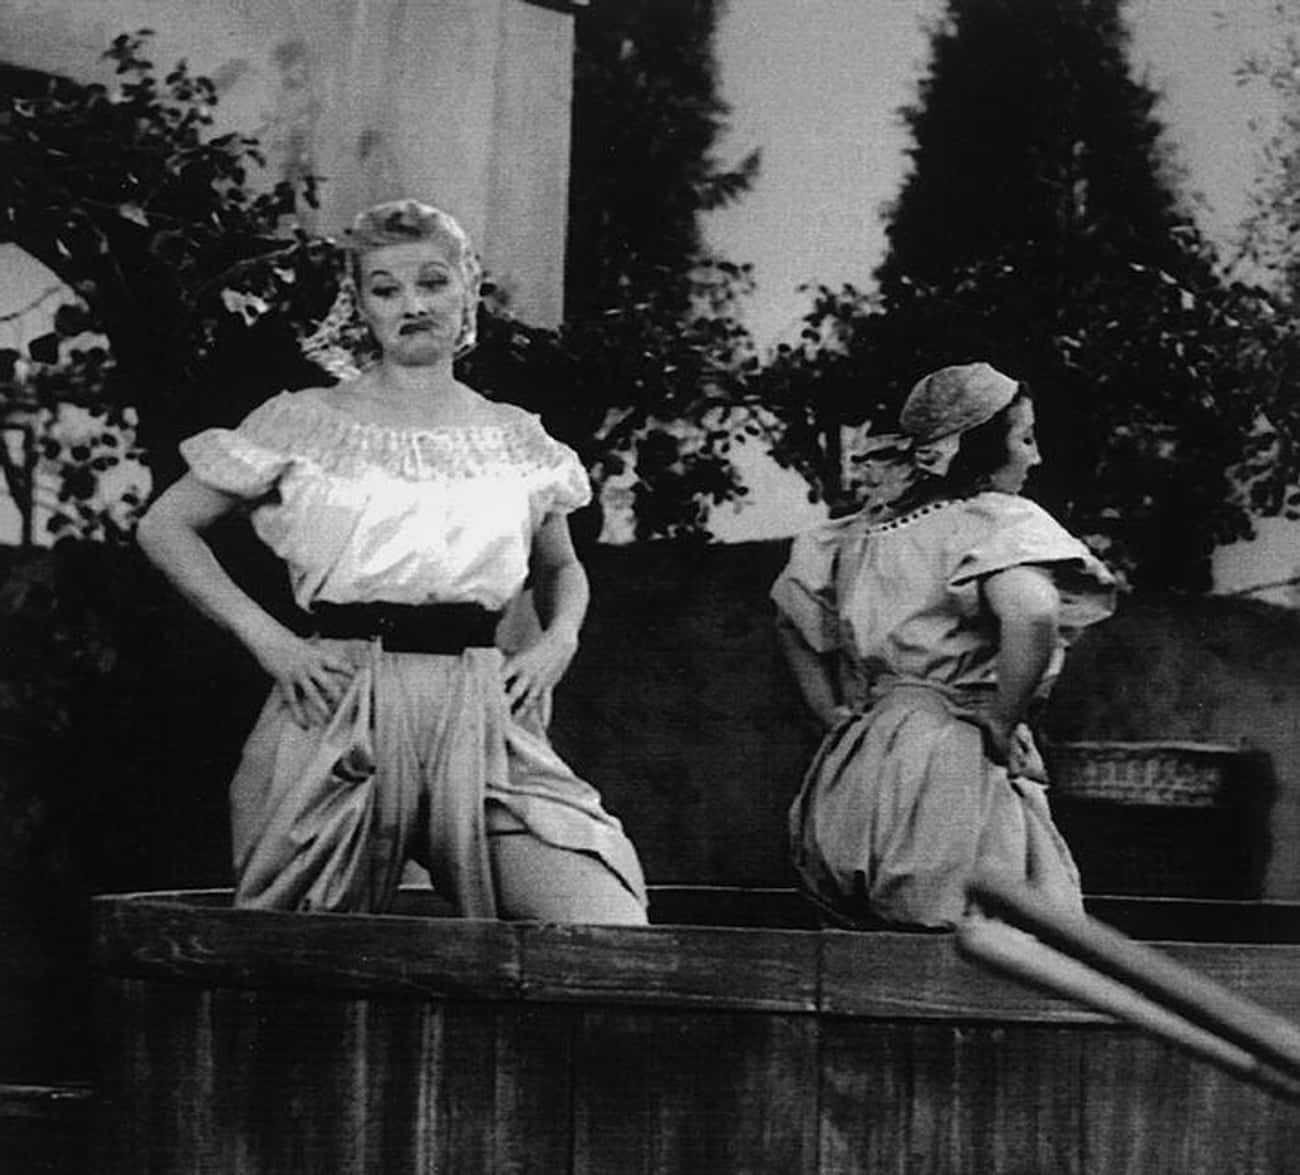 The Grape Stomping Scene Almost Cost Lucille Ball Her Life